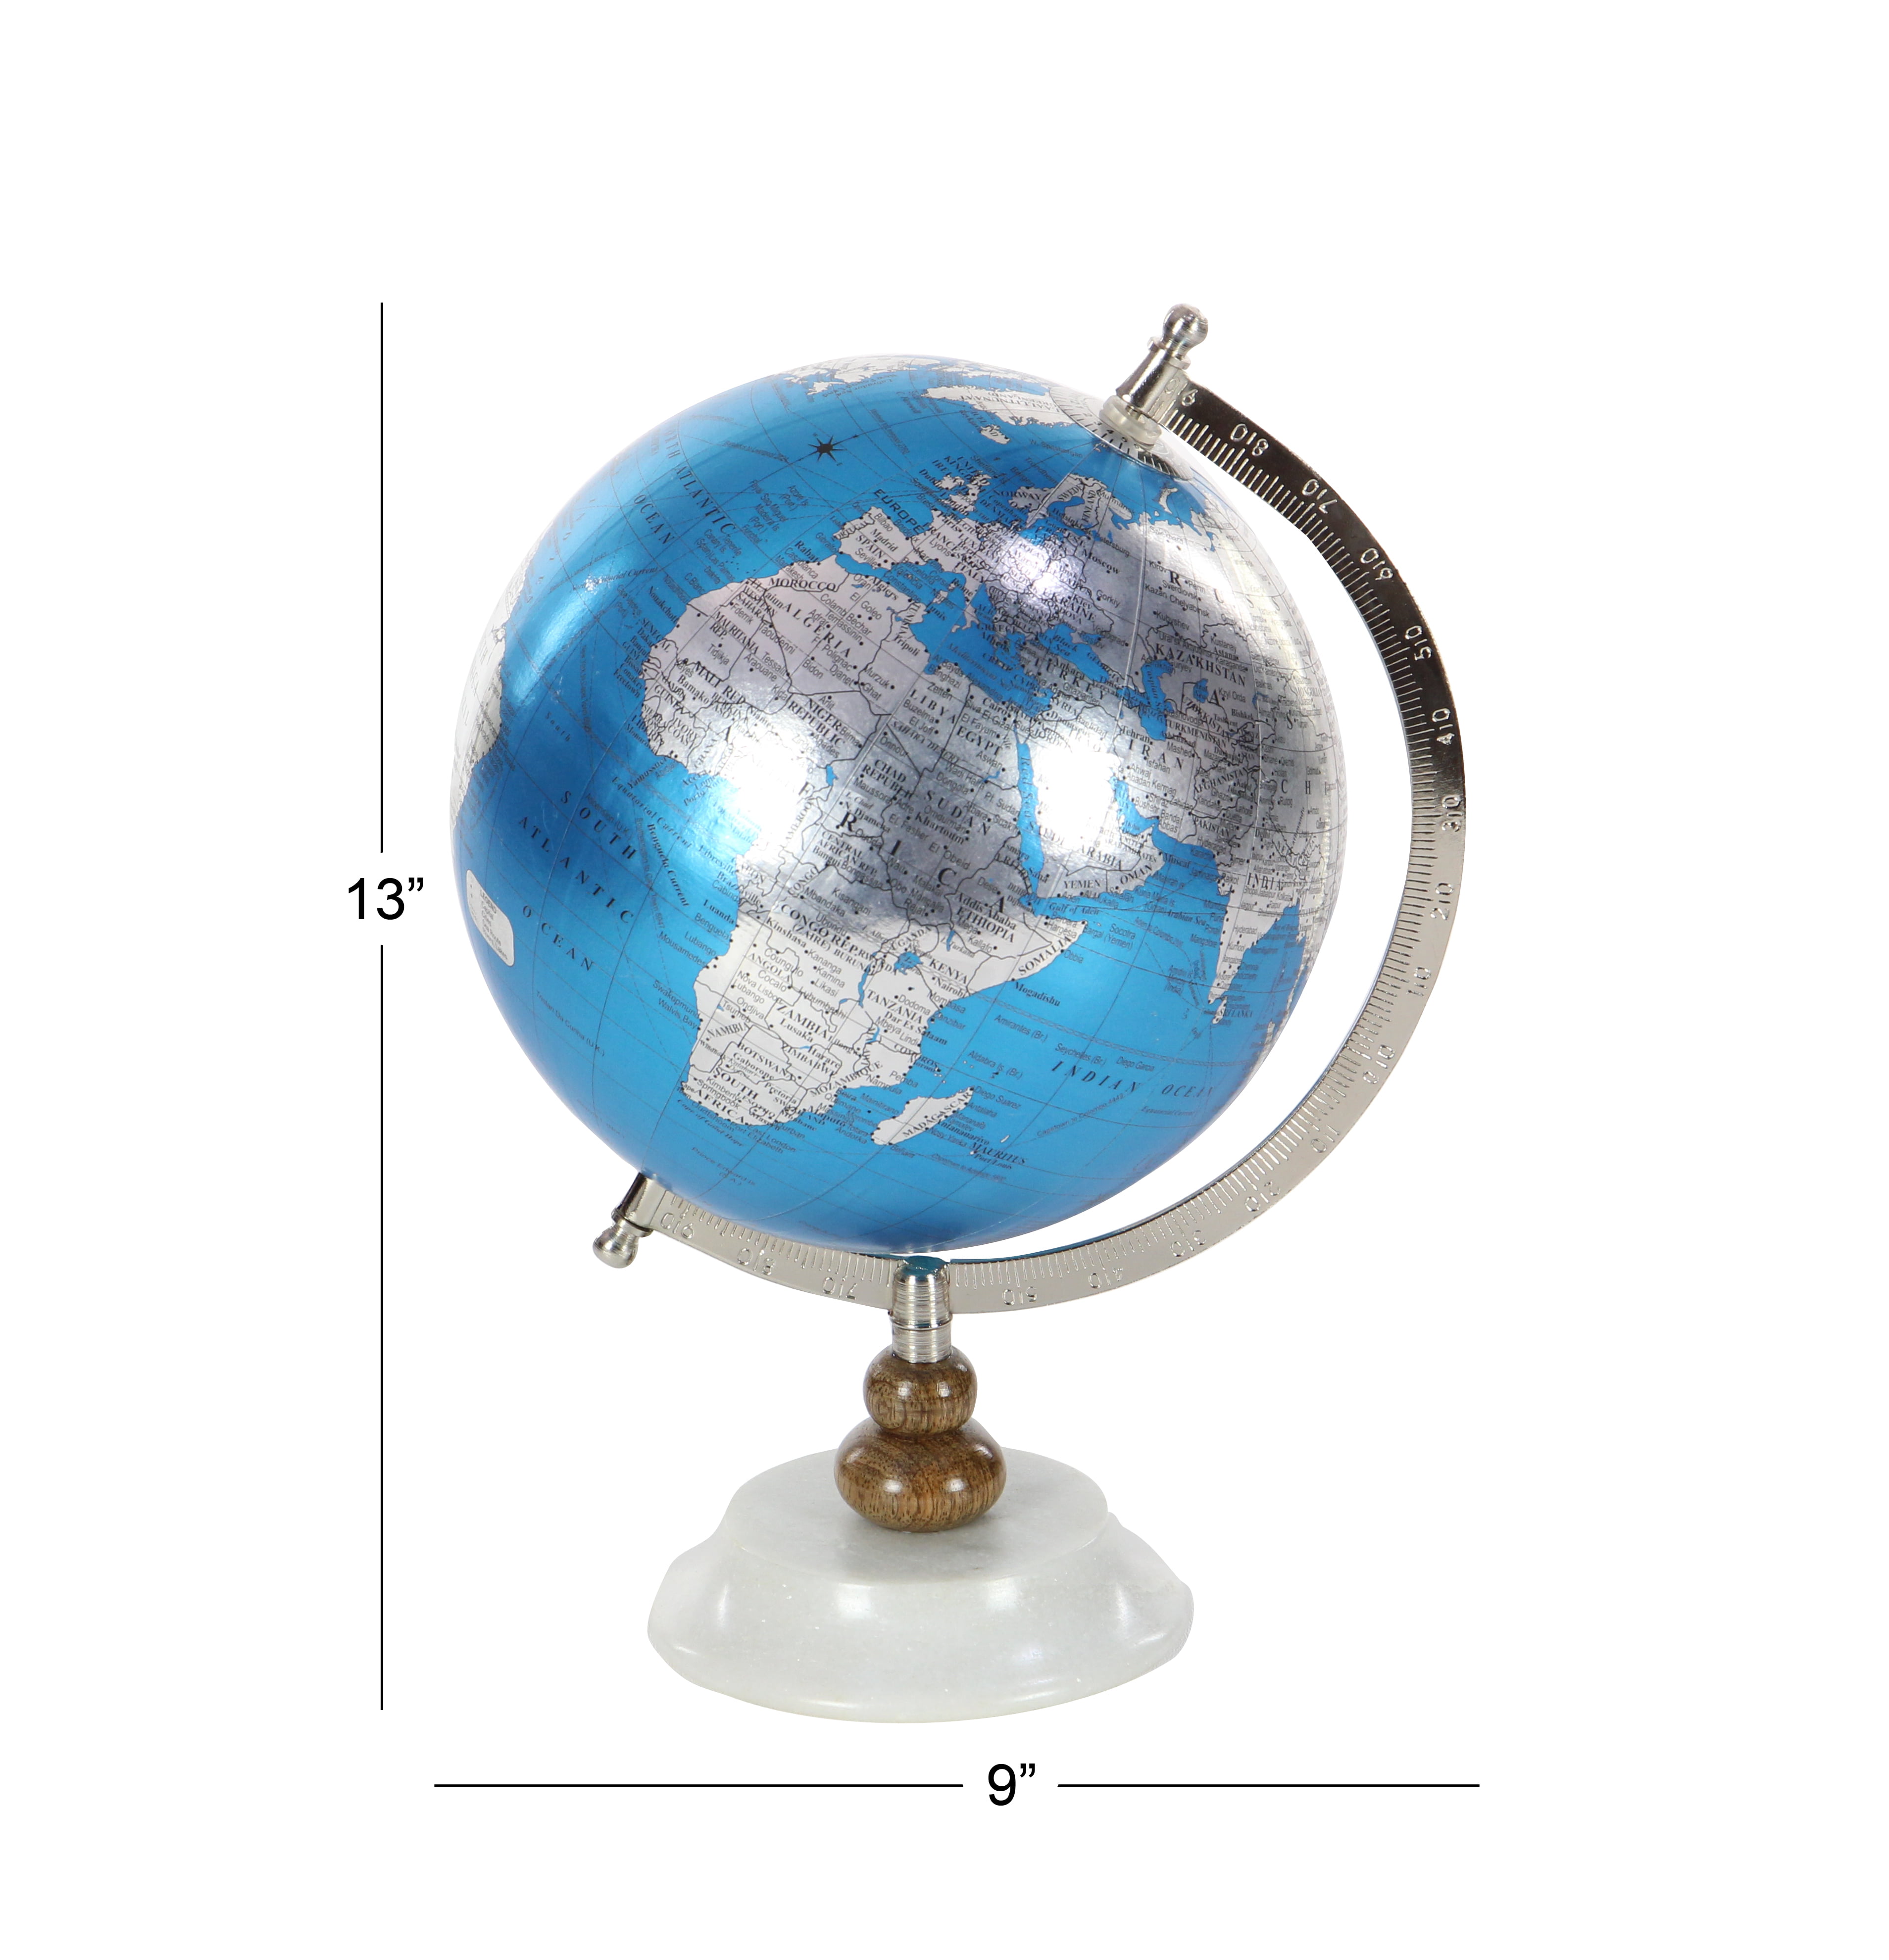 8 Inches x 5 Inches Deco 79 Iron World Globe with Marble Base Black/White/Silver